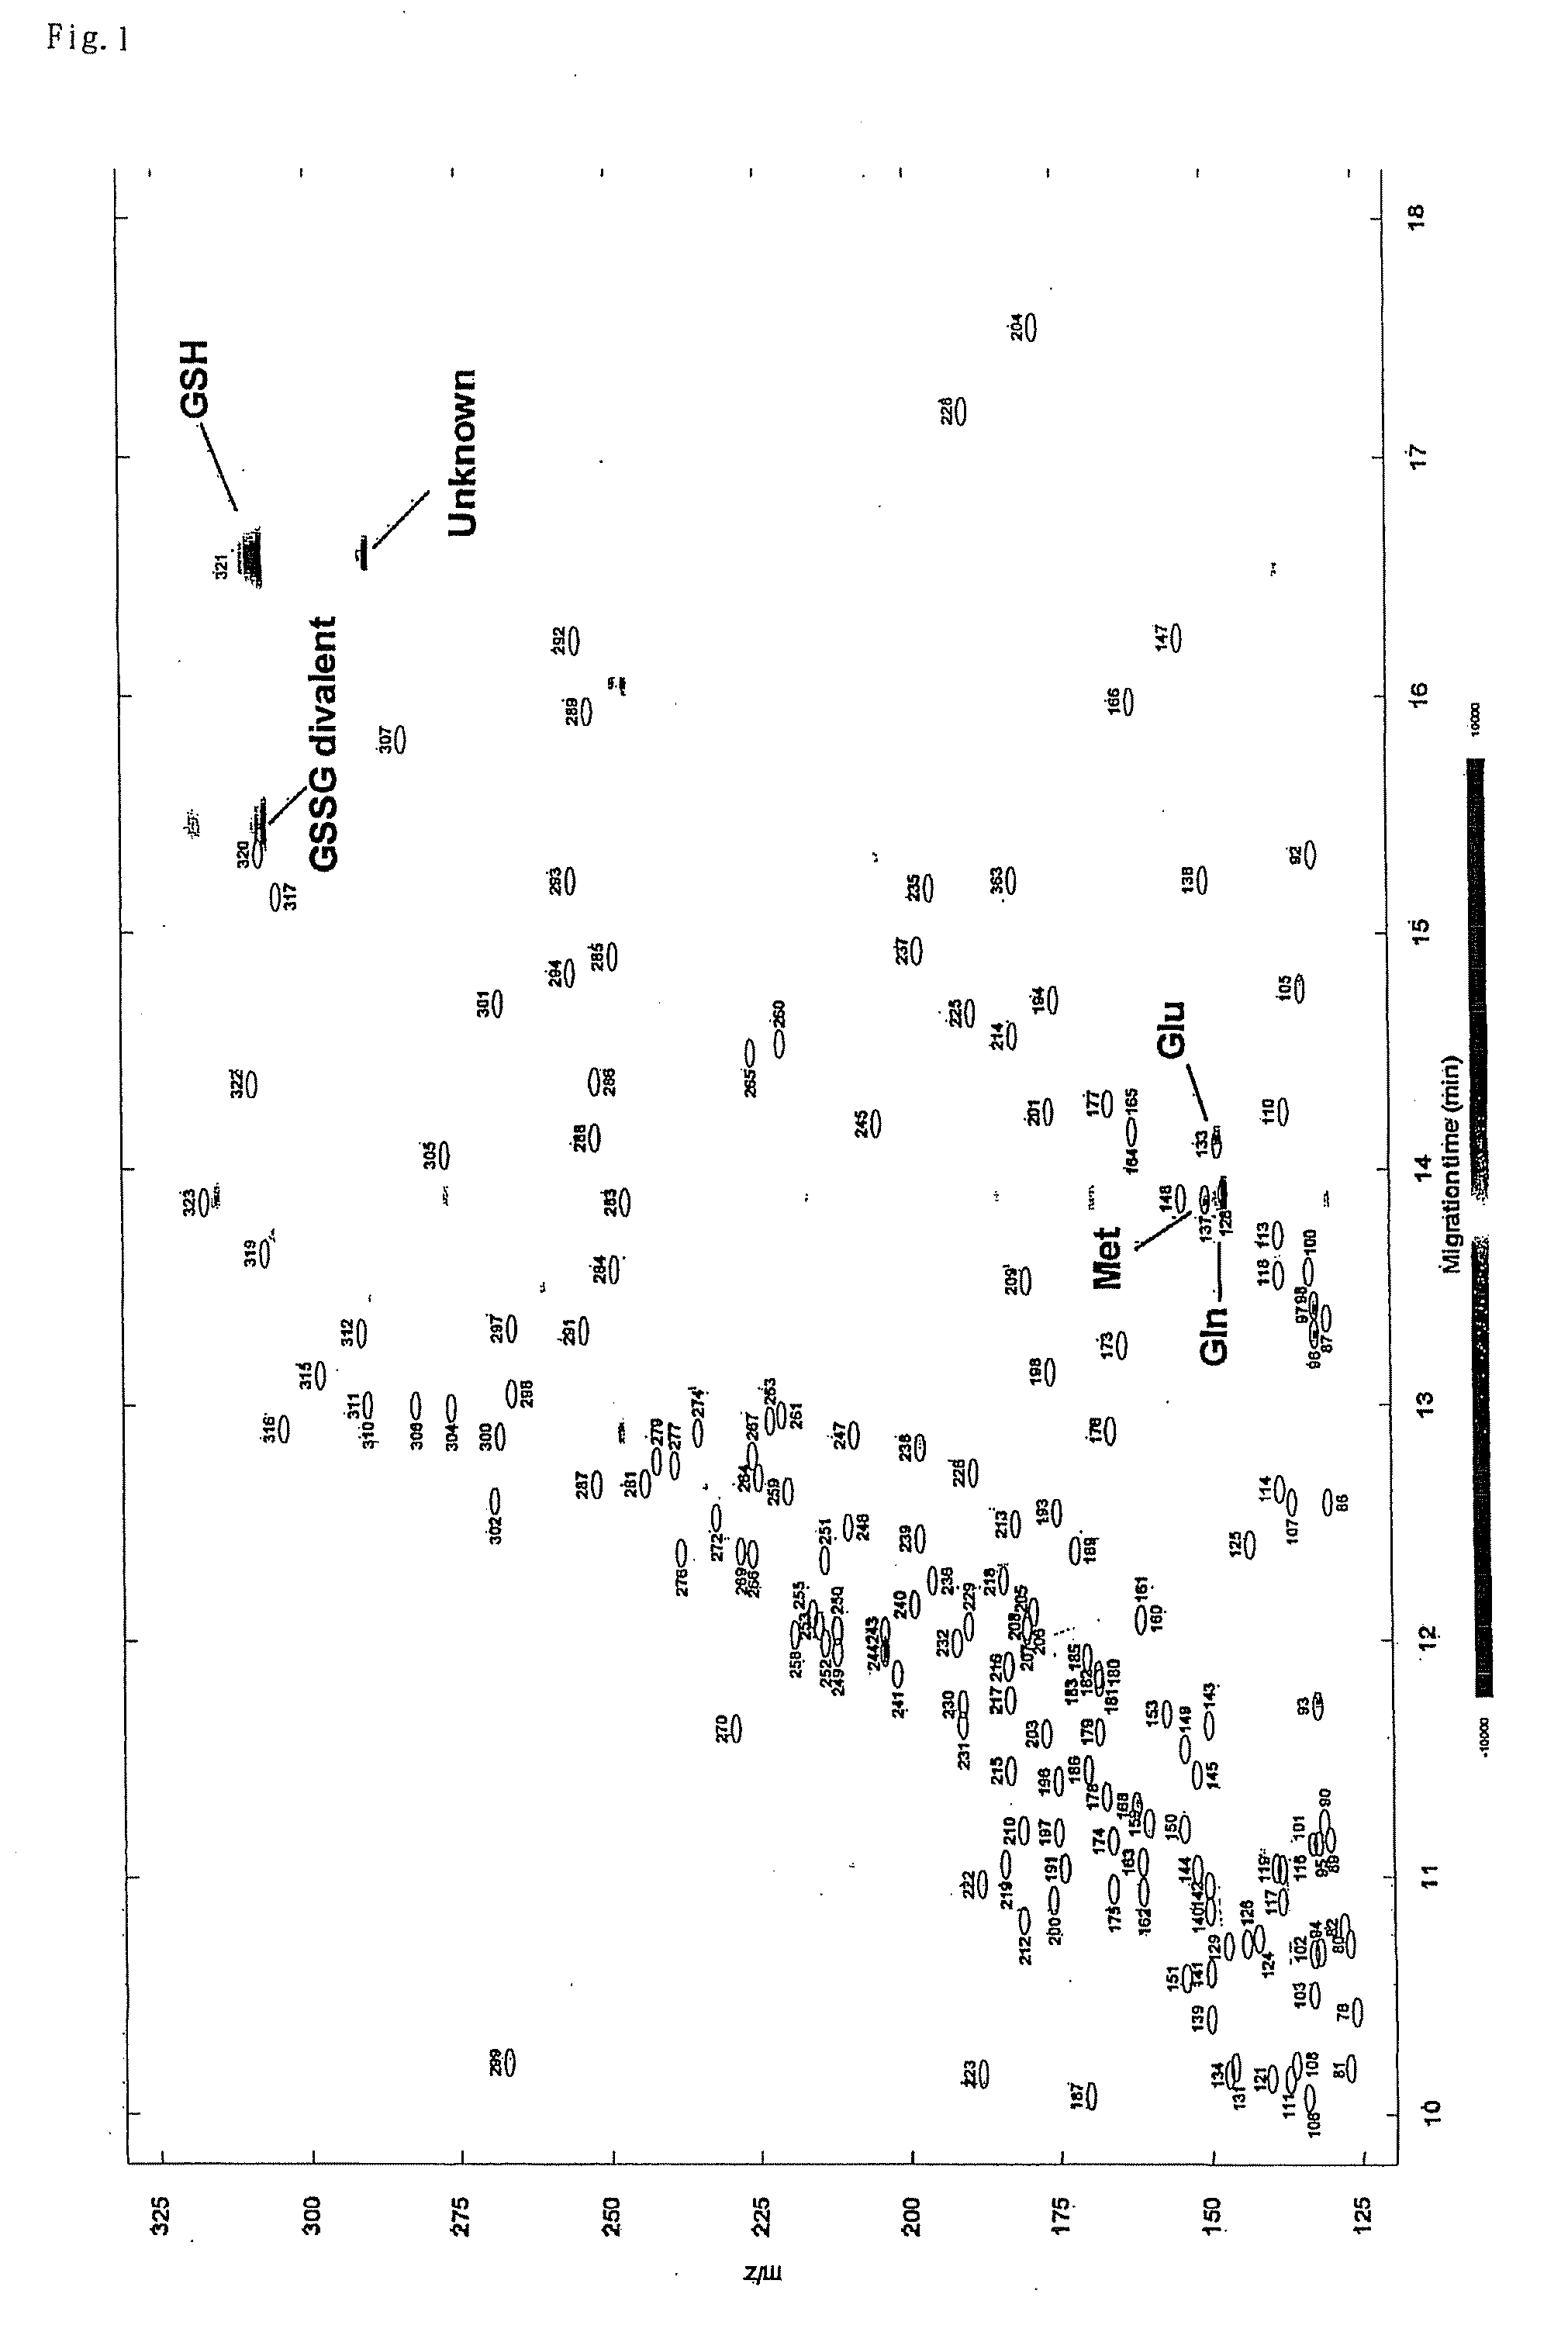 Method for determination of oxidative stress